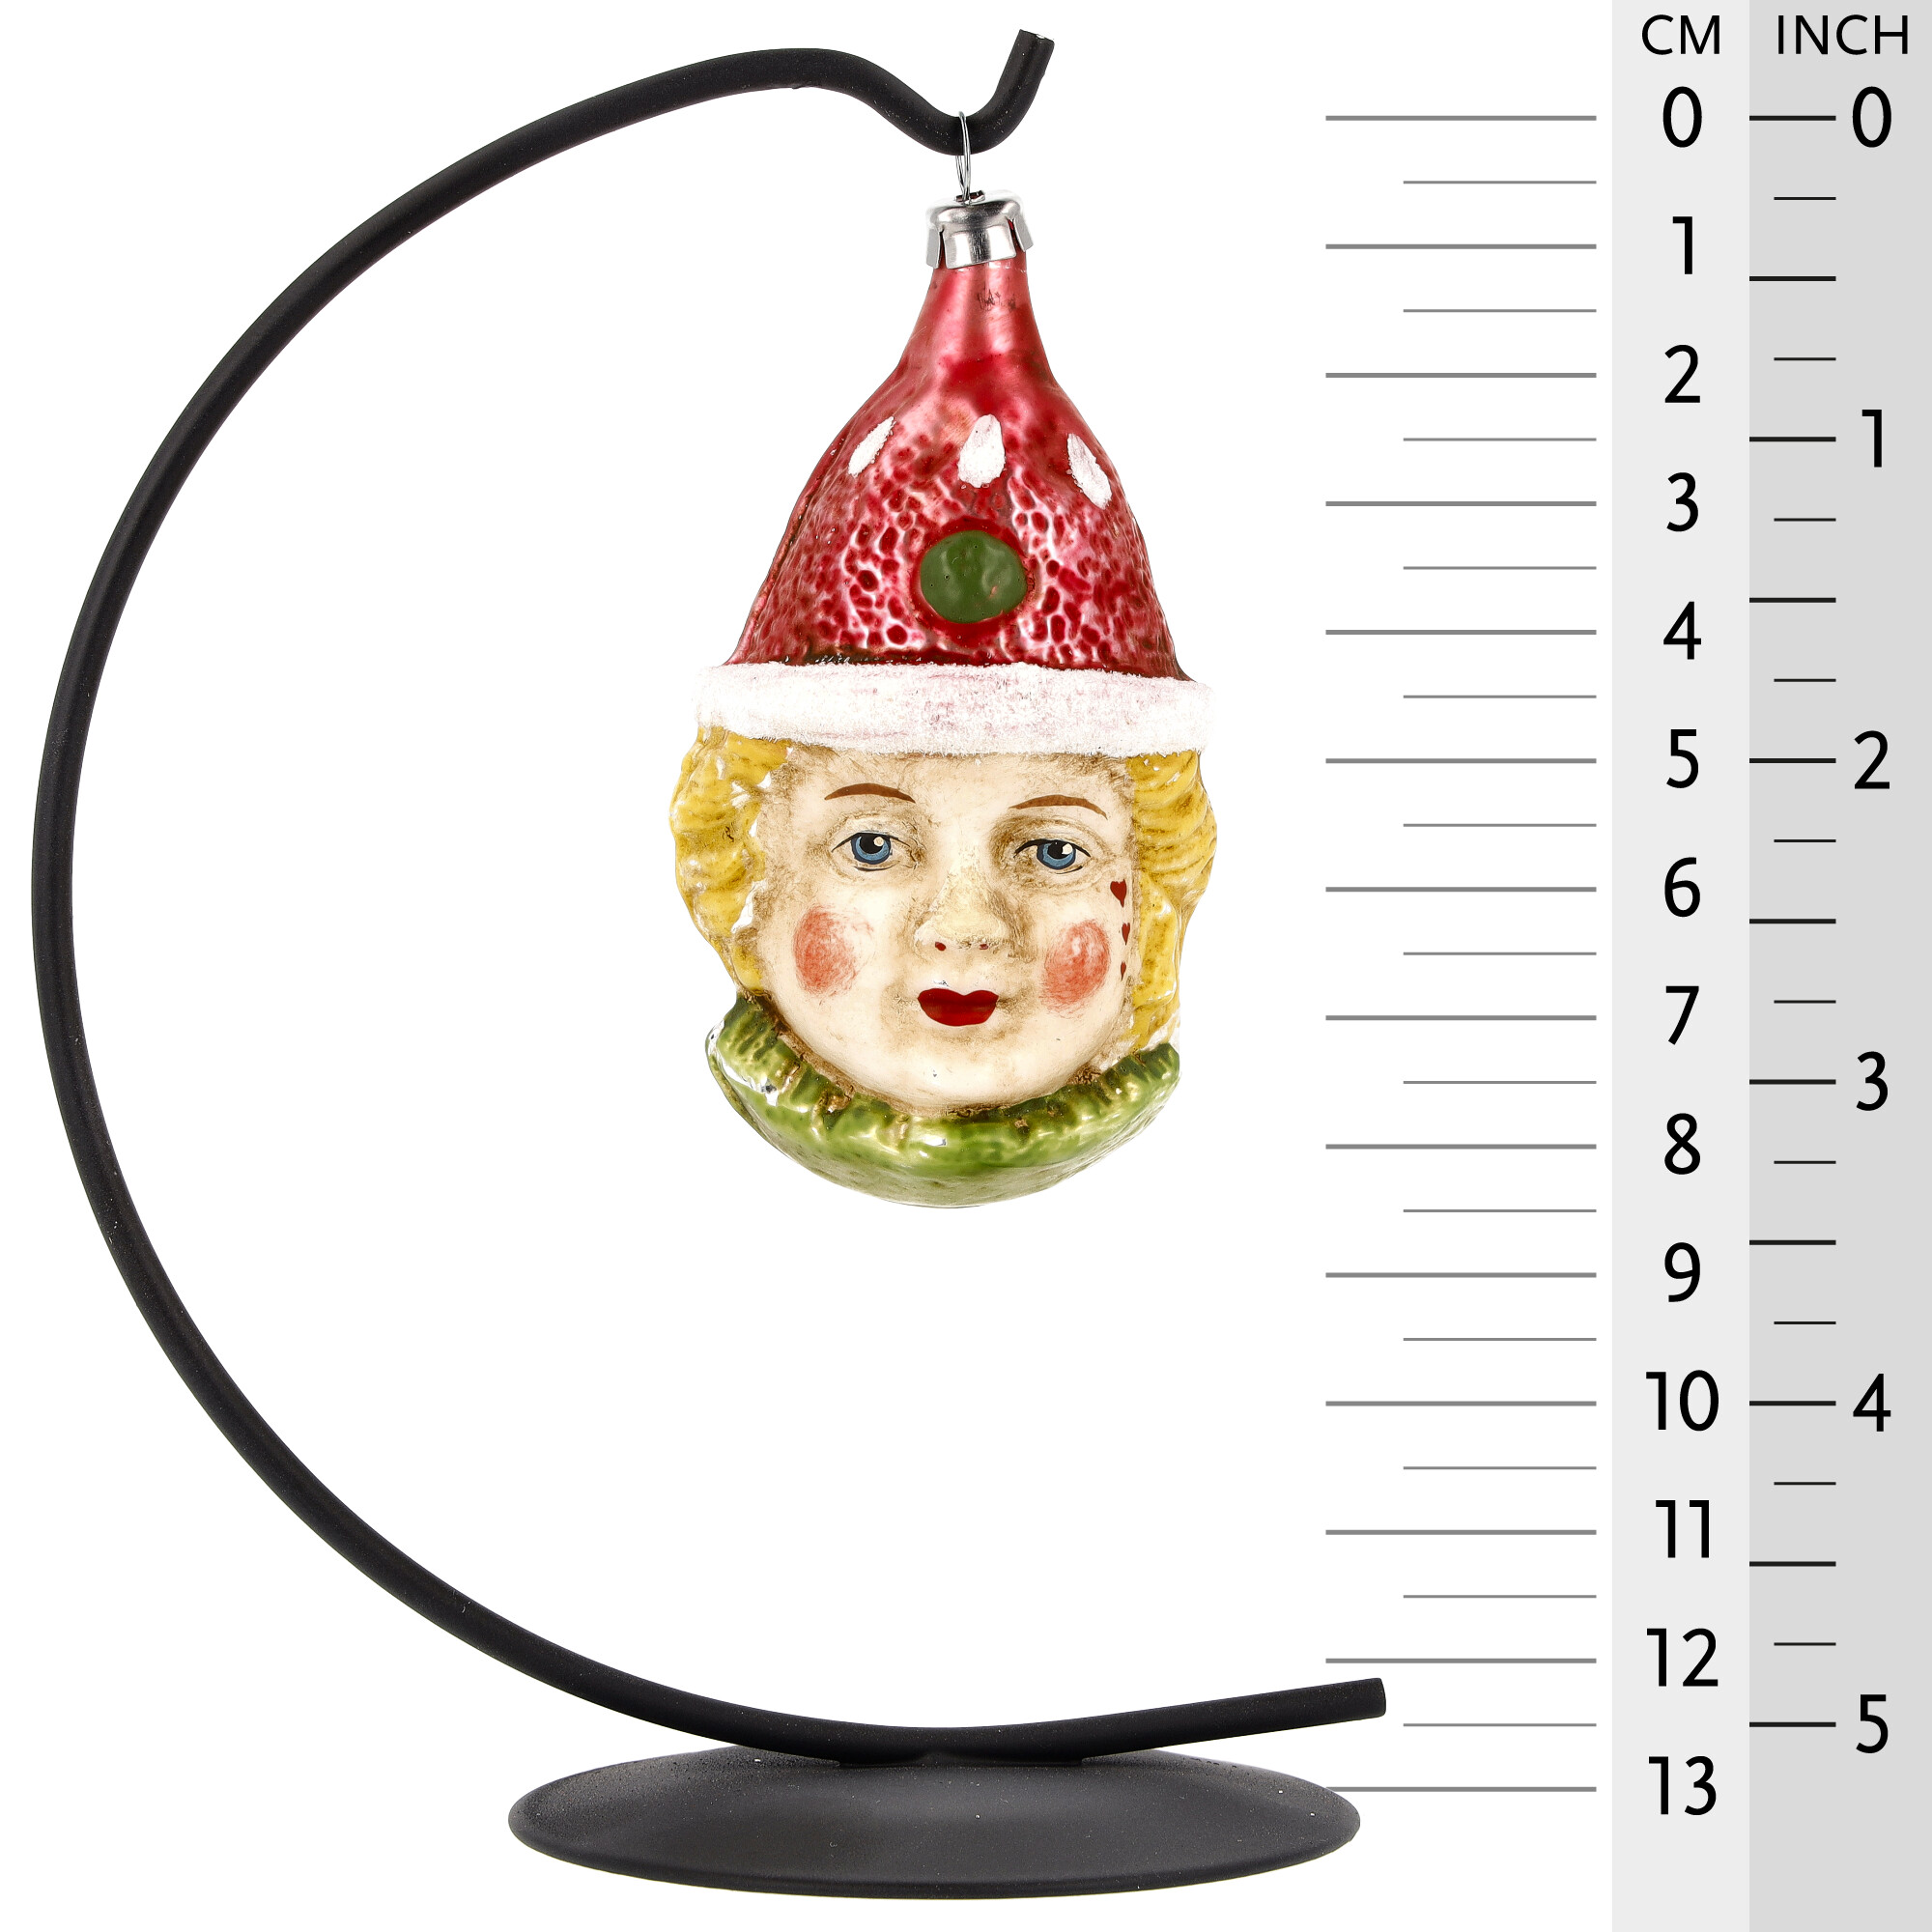 Retro Vintage style Christmas Glass Ornament - Clown head with red cap